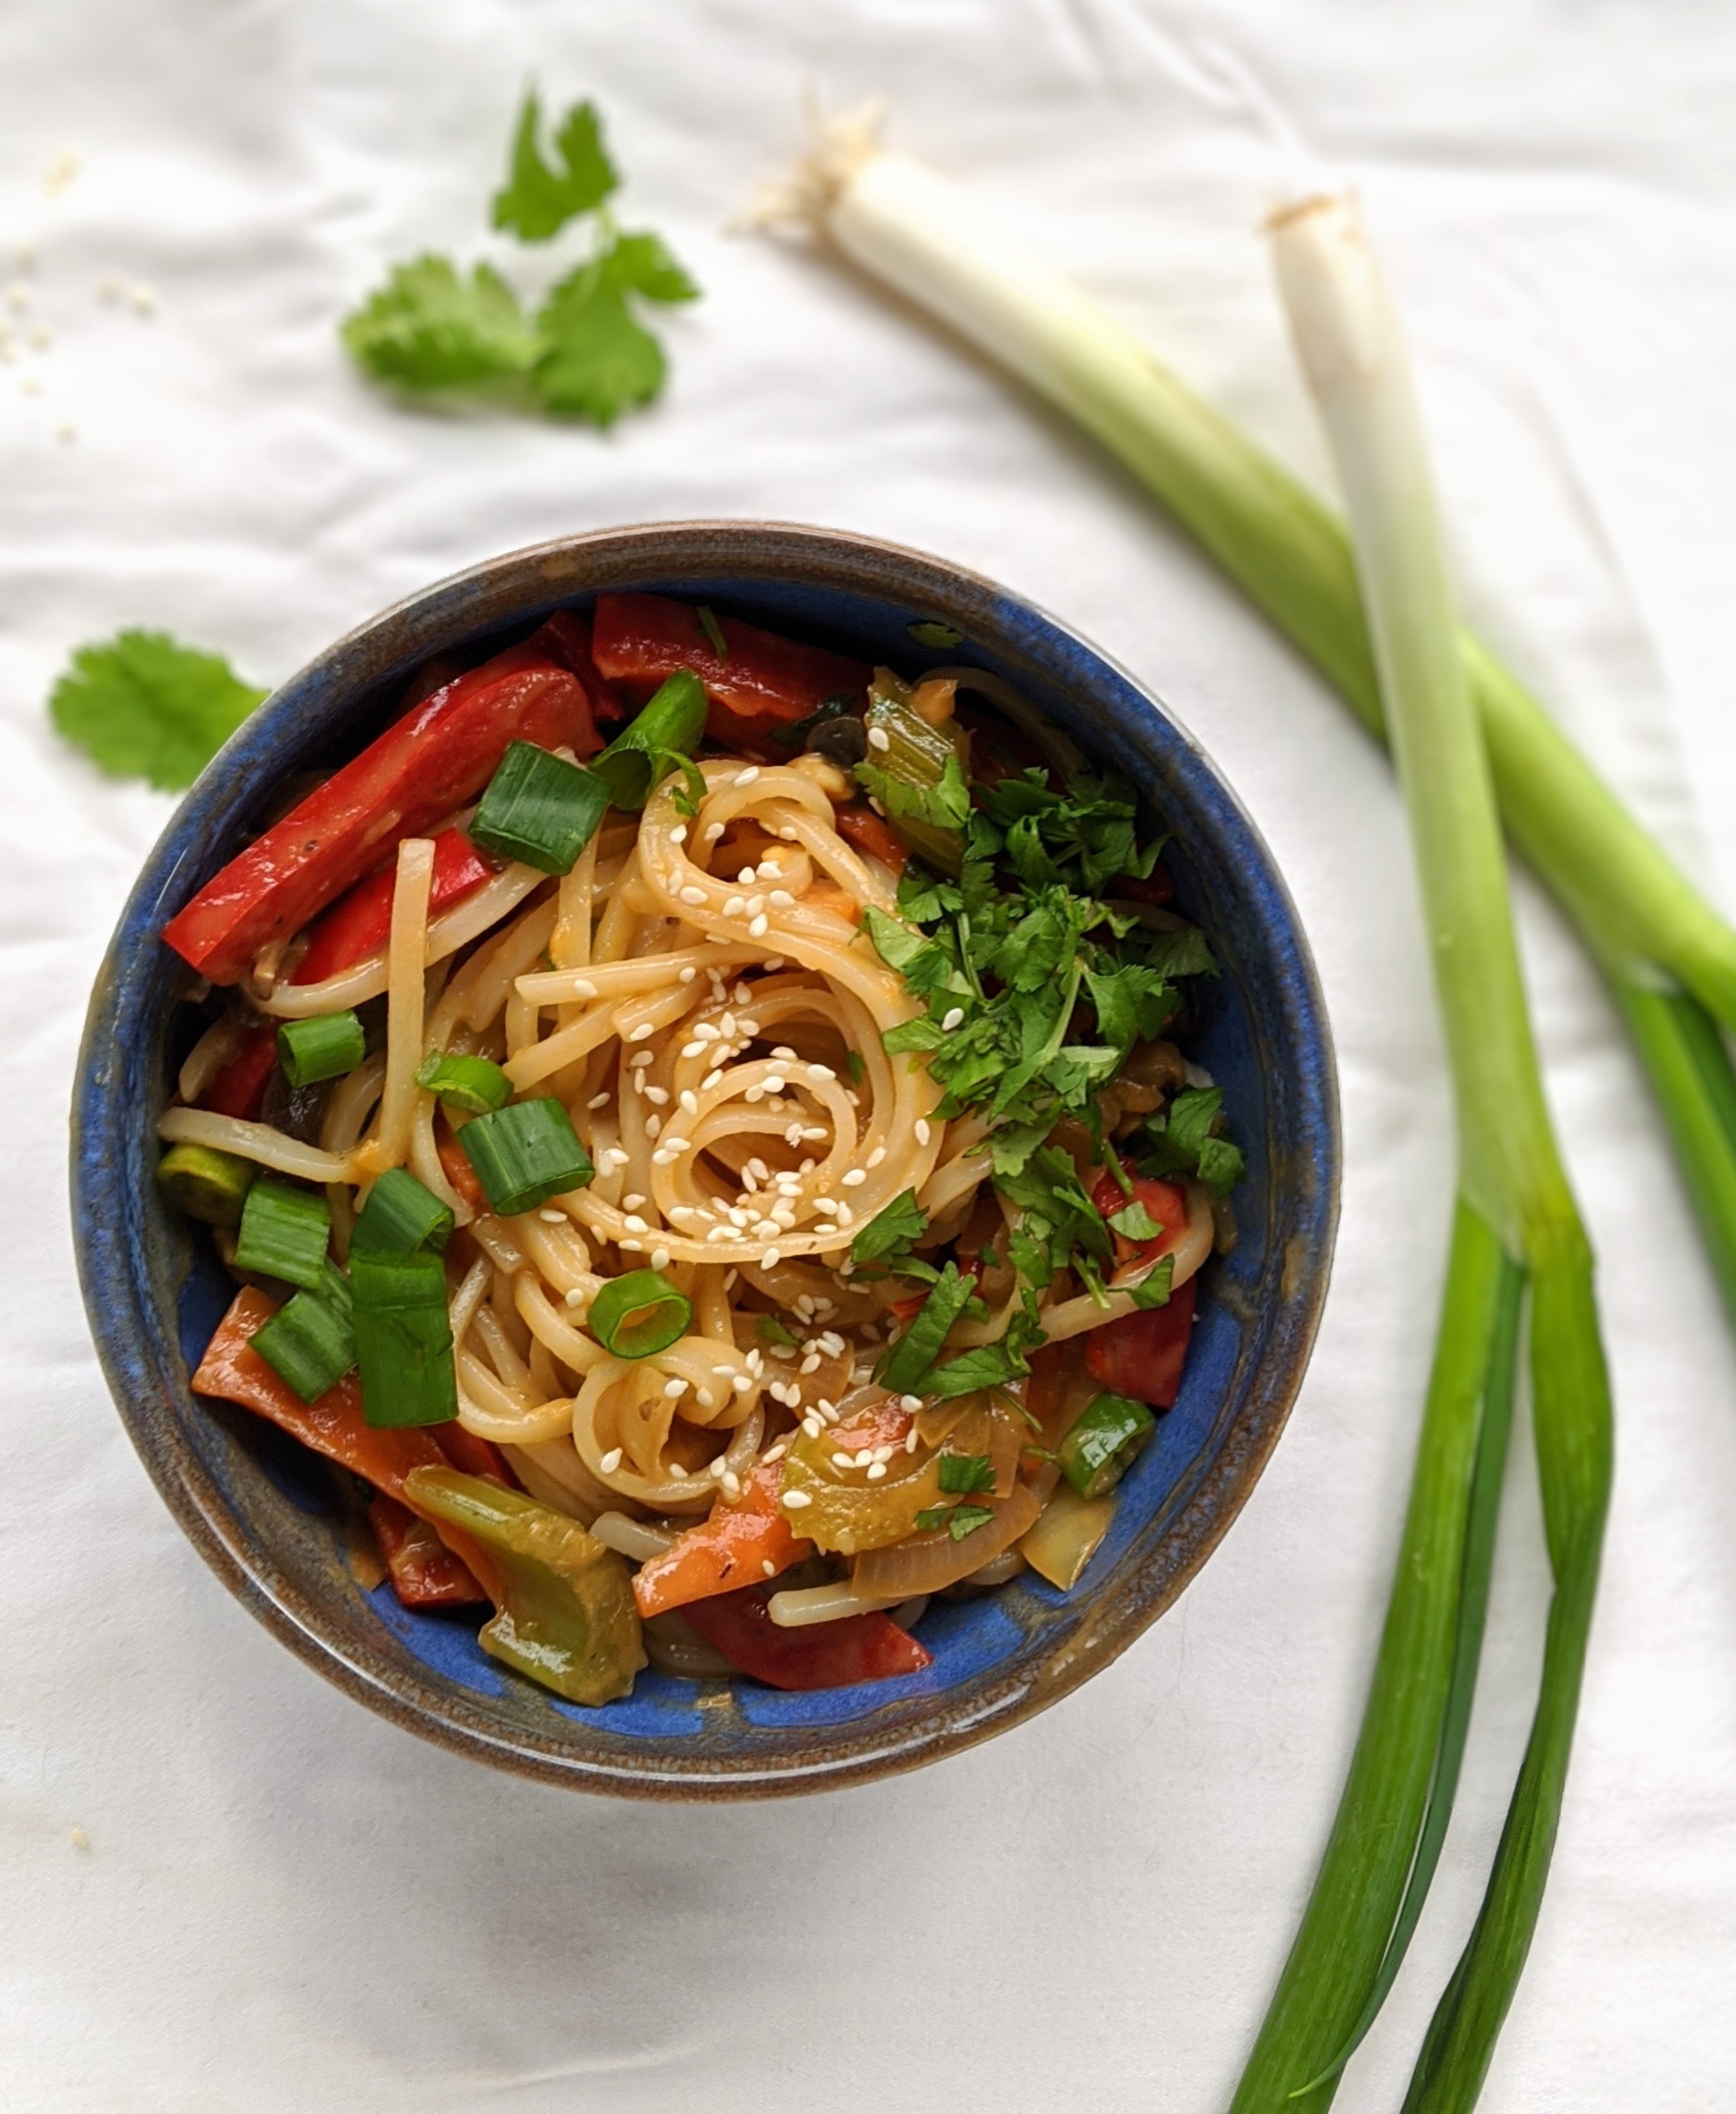 Rice Noodles with Peanut Sauce vegan gluten free peanut noodles recipe based spicy rice noodles in a peanut sauce with sesame seeds green onion bell pepper carrots and cilantro